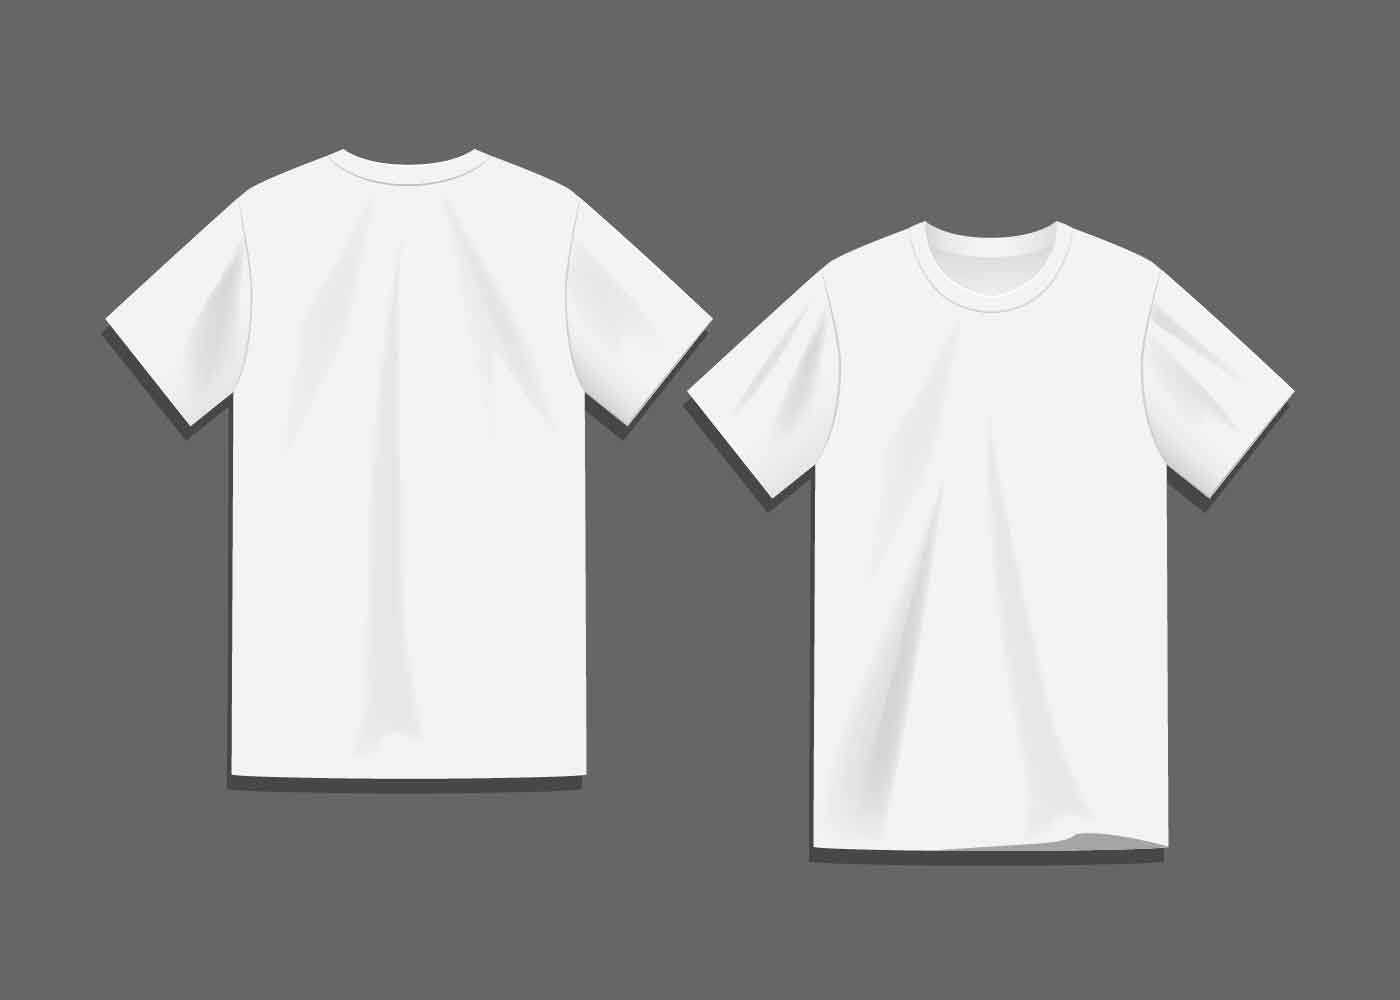 White Blank T Shirt Template Vector – Download Free Vectors With Blank Tee Shirt Template